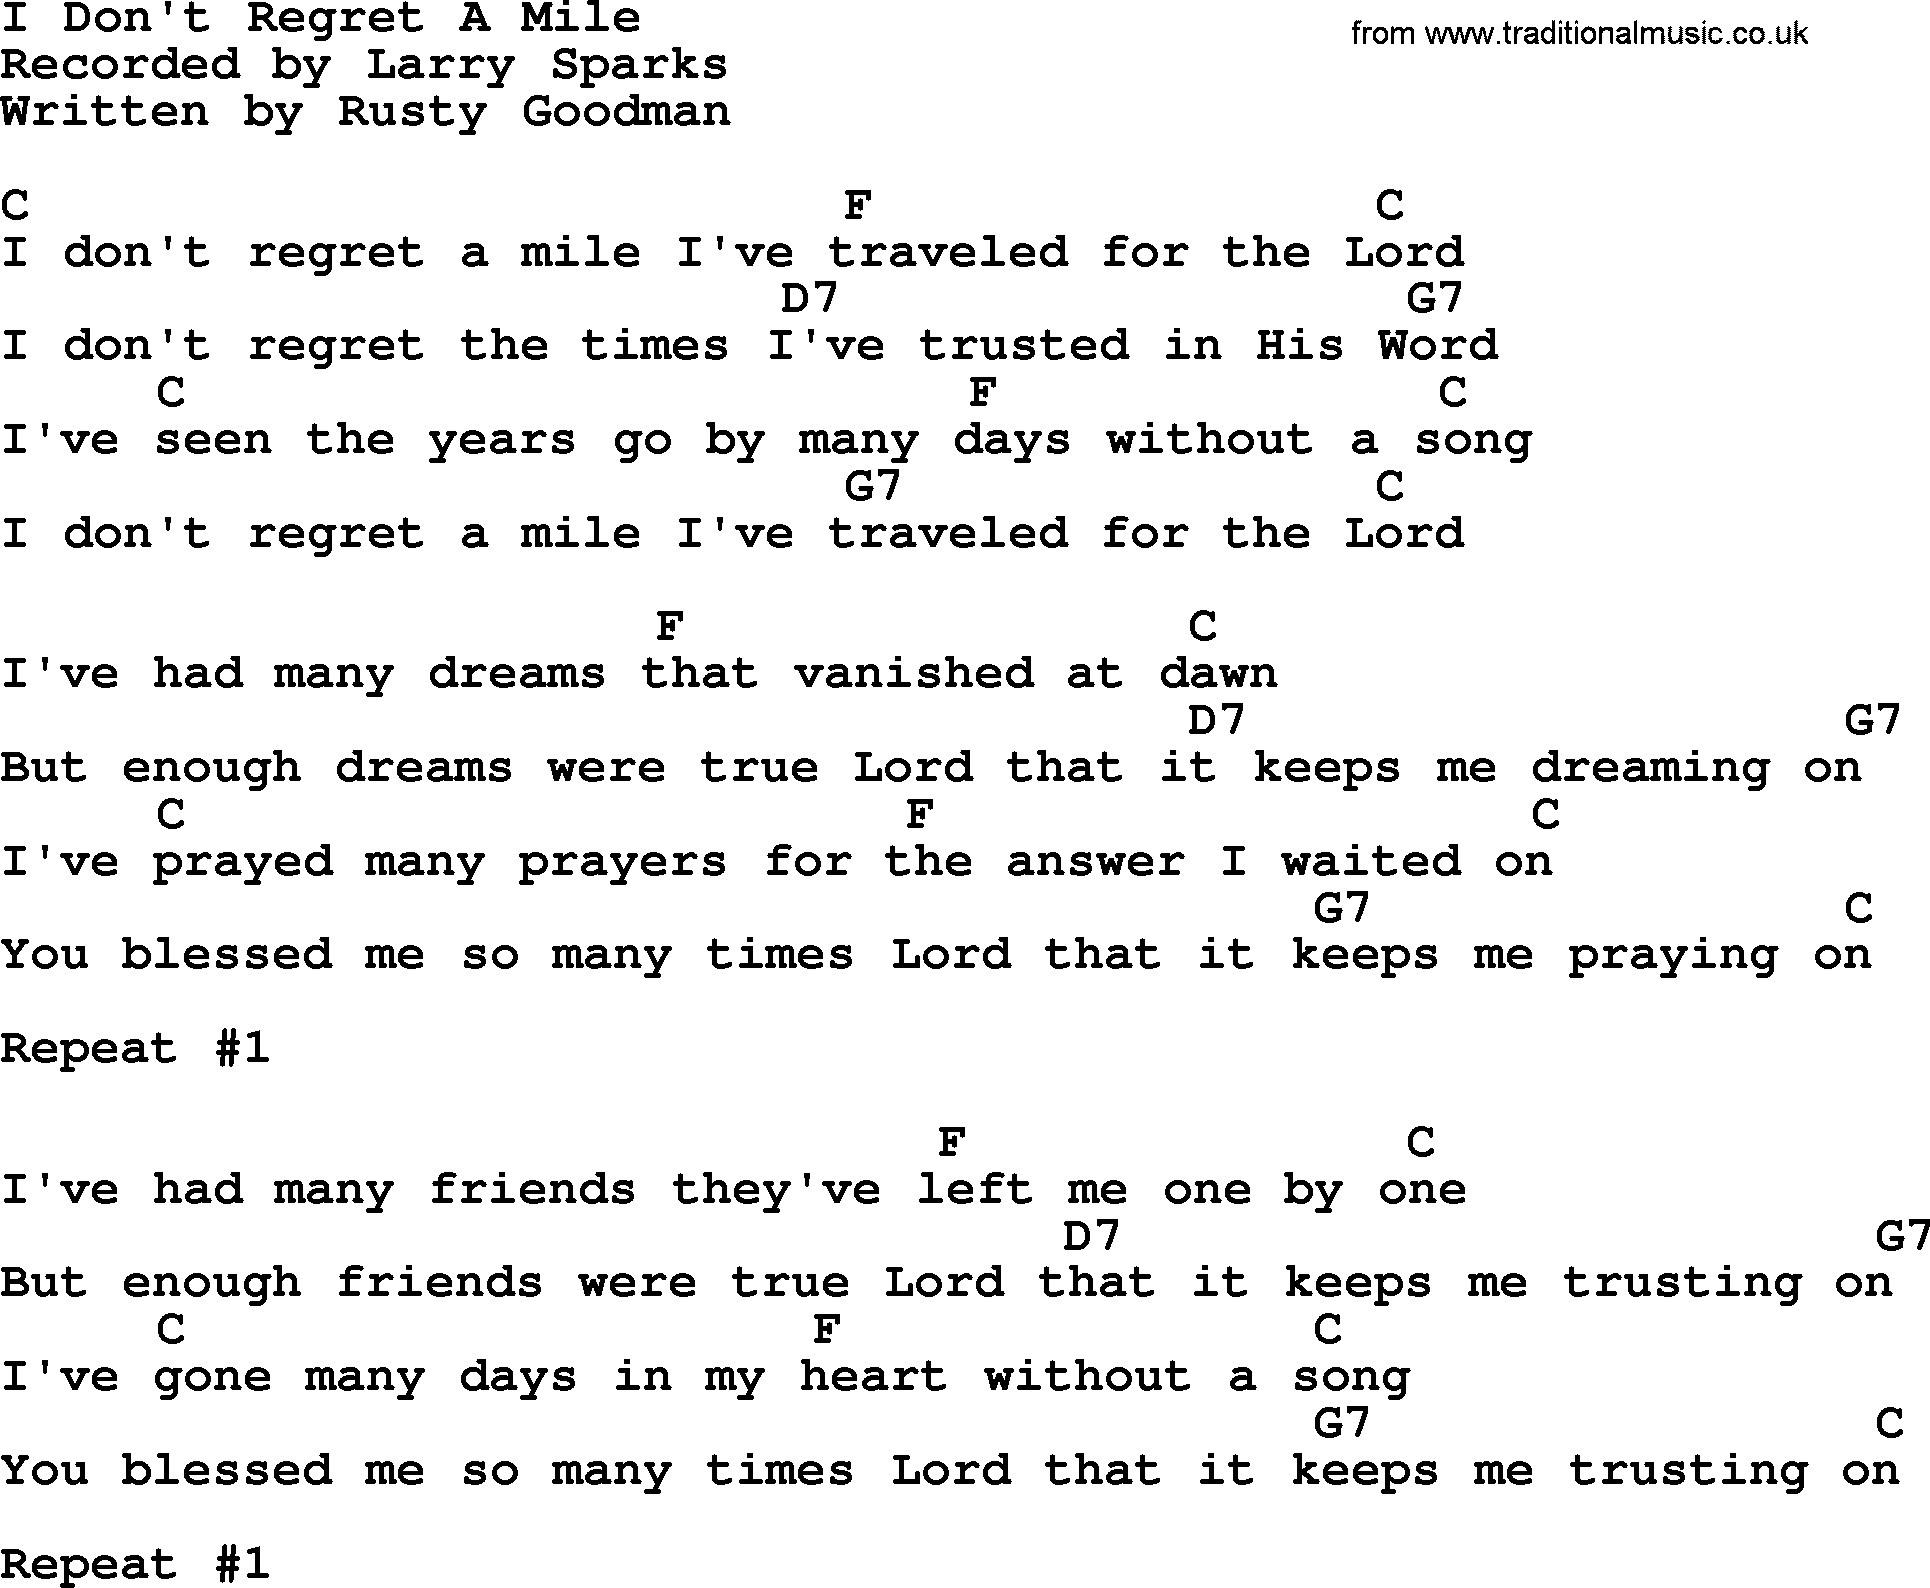 Bluegrass song: I Don't Regret A Mile, lyrics and chords